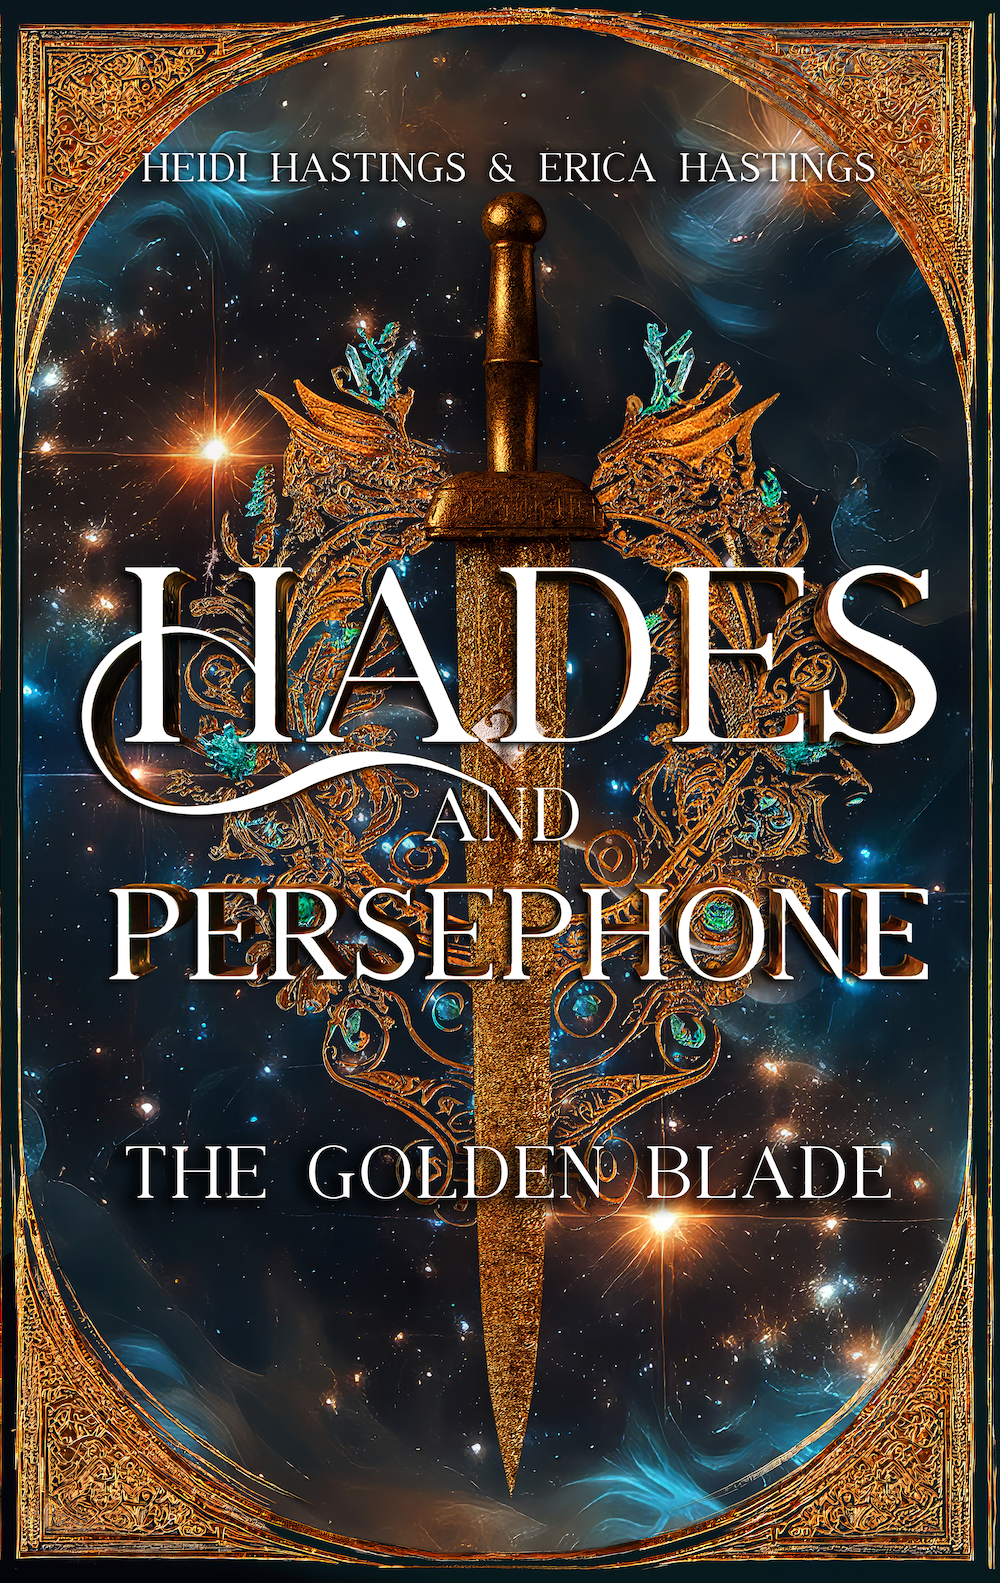 Hades and Persephone: The Golden Blade by Heidi Hastings and Erica Hastings